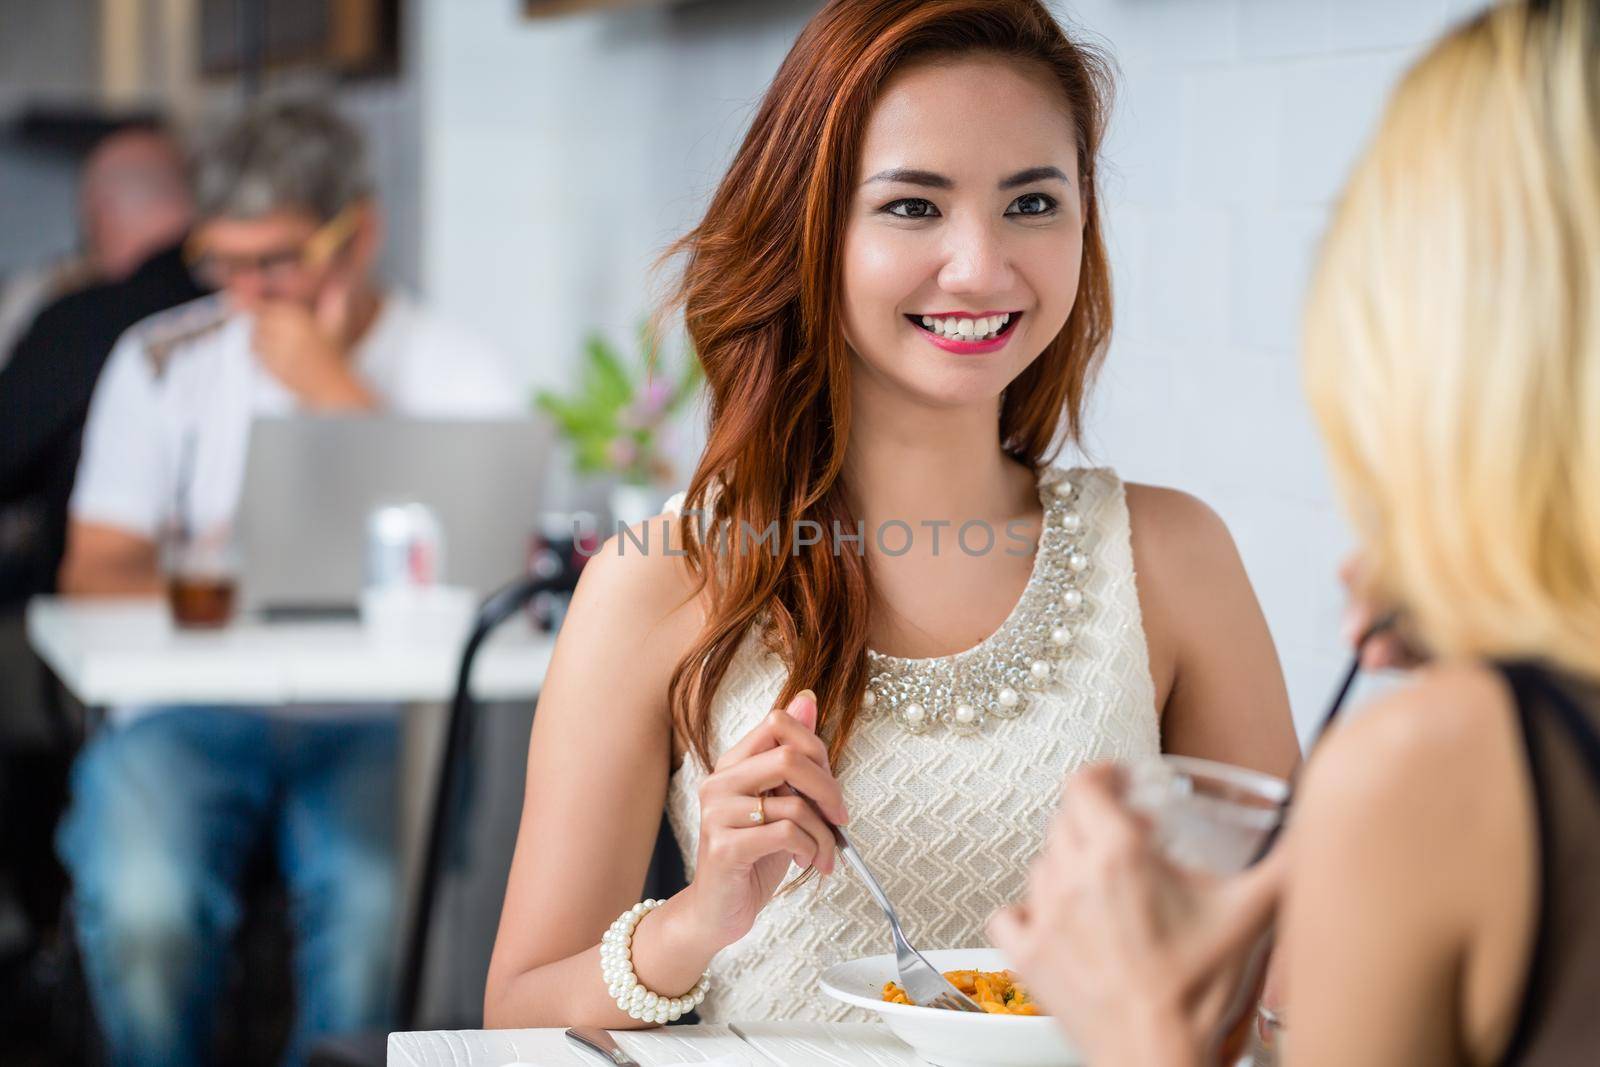 Attractive elegant young Asian woman having lunch with a friend at a restaurant sitting at the table together smiling and chatting, over the shoulder view